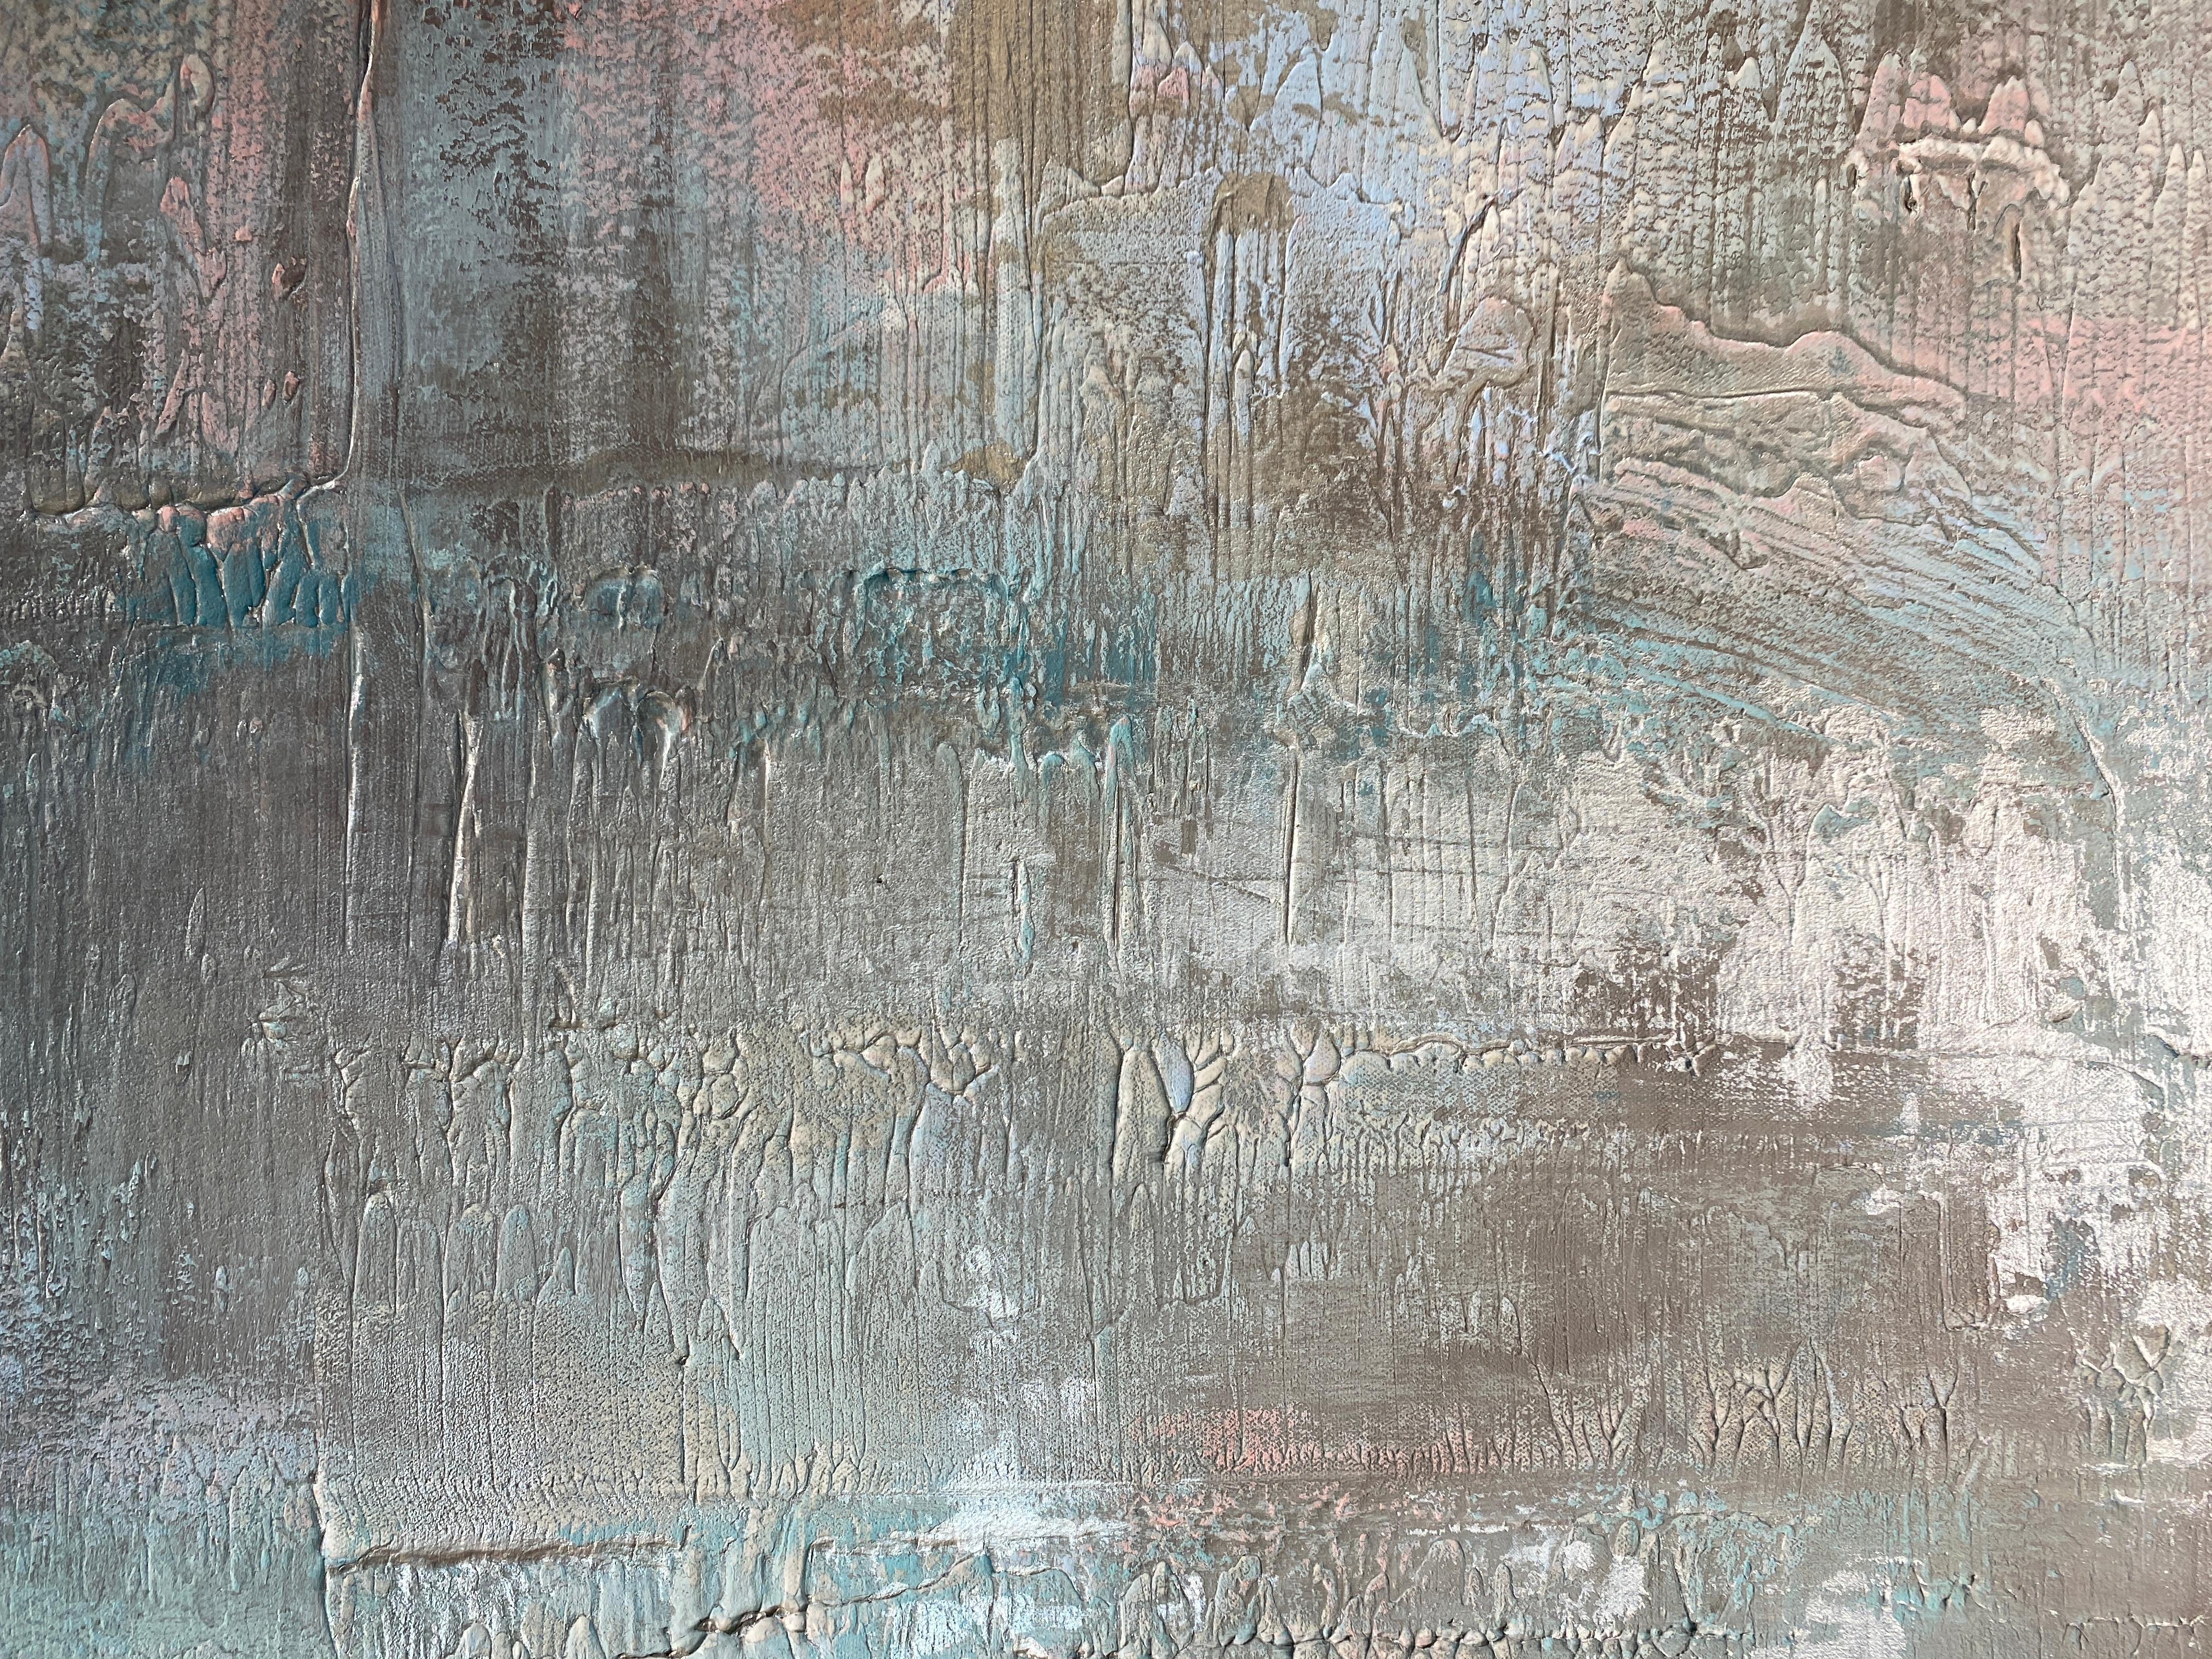 Silver Pink Teal Abstract Painting, Hand Embellished Giclee on Canvas

Collector's Edition Embellished Art Canvas Giclee With Brushstrokes and rich texture.

State-of-the-art HAND EMBELLISHED ∽ MUSEUM QUALITY ∽ DISPLAY READY Giclee Reproduction
Each